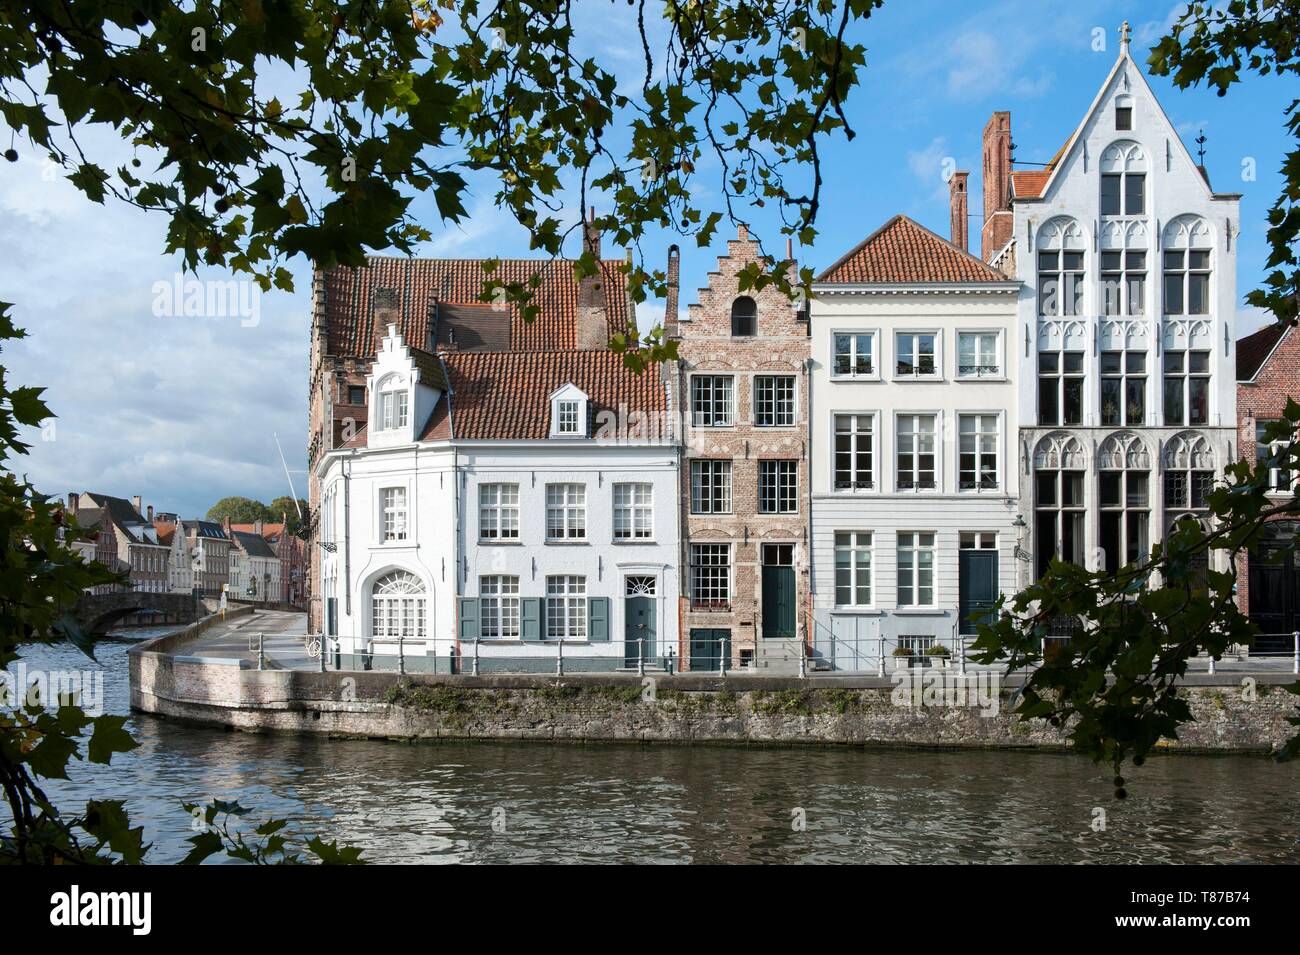 Belgium, Western Flanders, Bruges, Historic centre listed as World Heritage by UNESCO, Canal, Spiegelrei Stock Photo